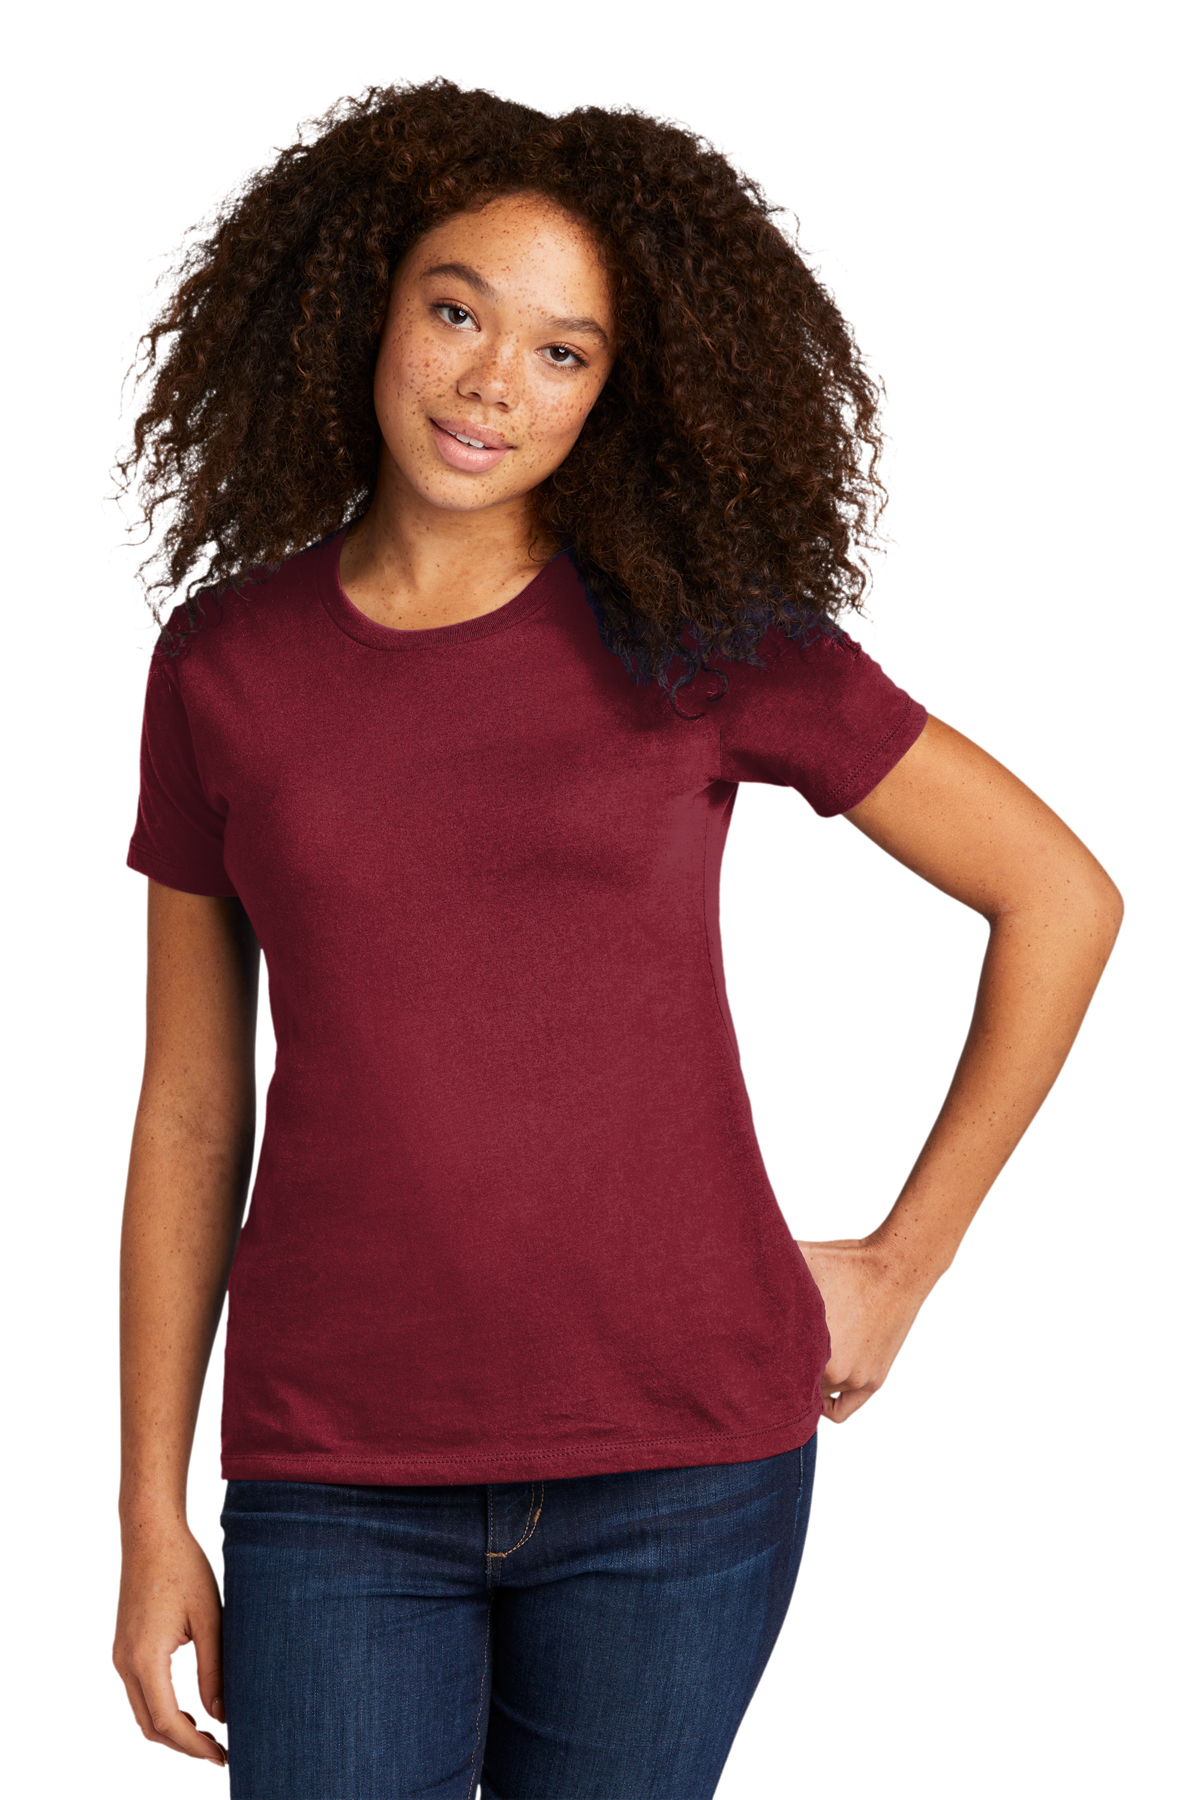 Next Level Apparel Women's Cotton Tee, Product